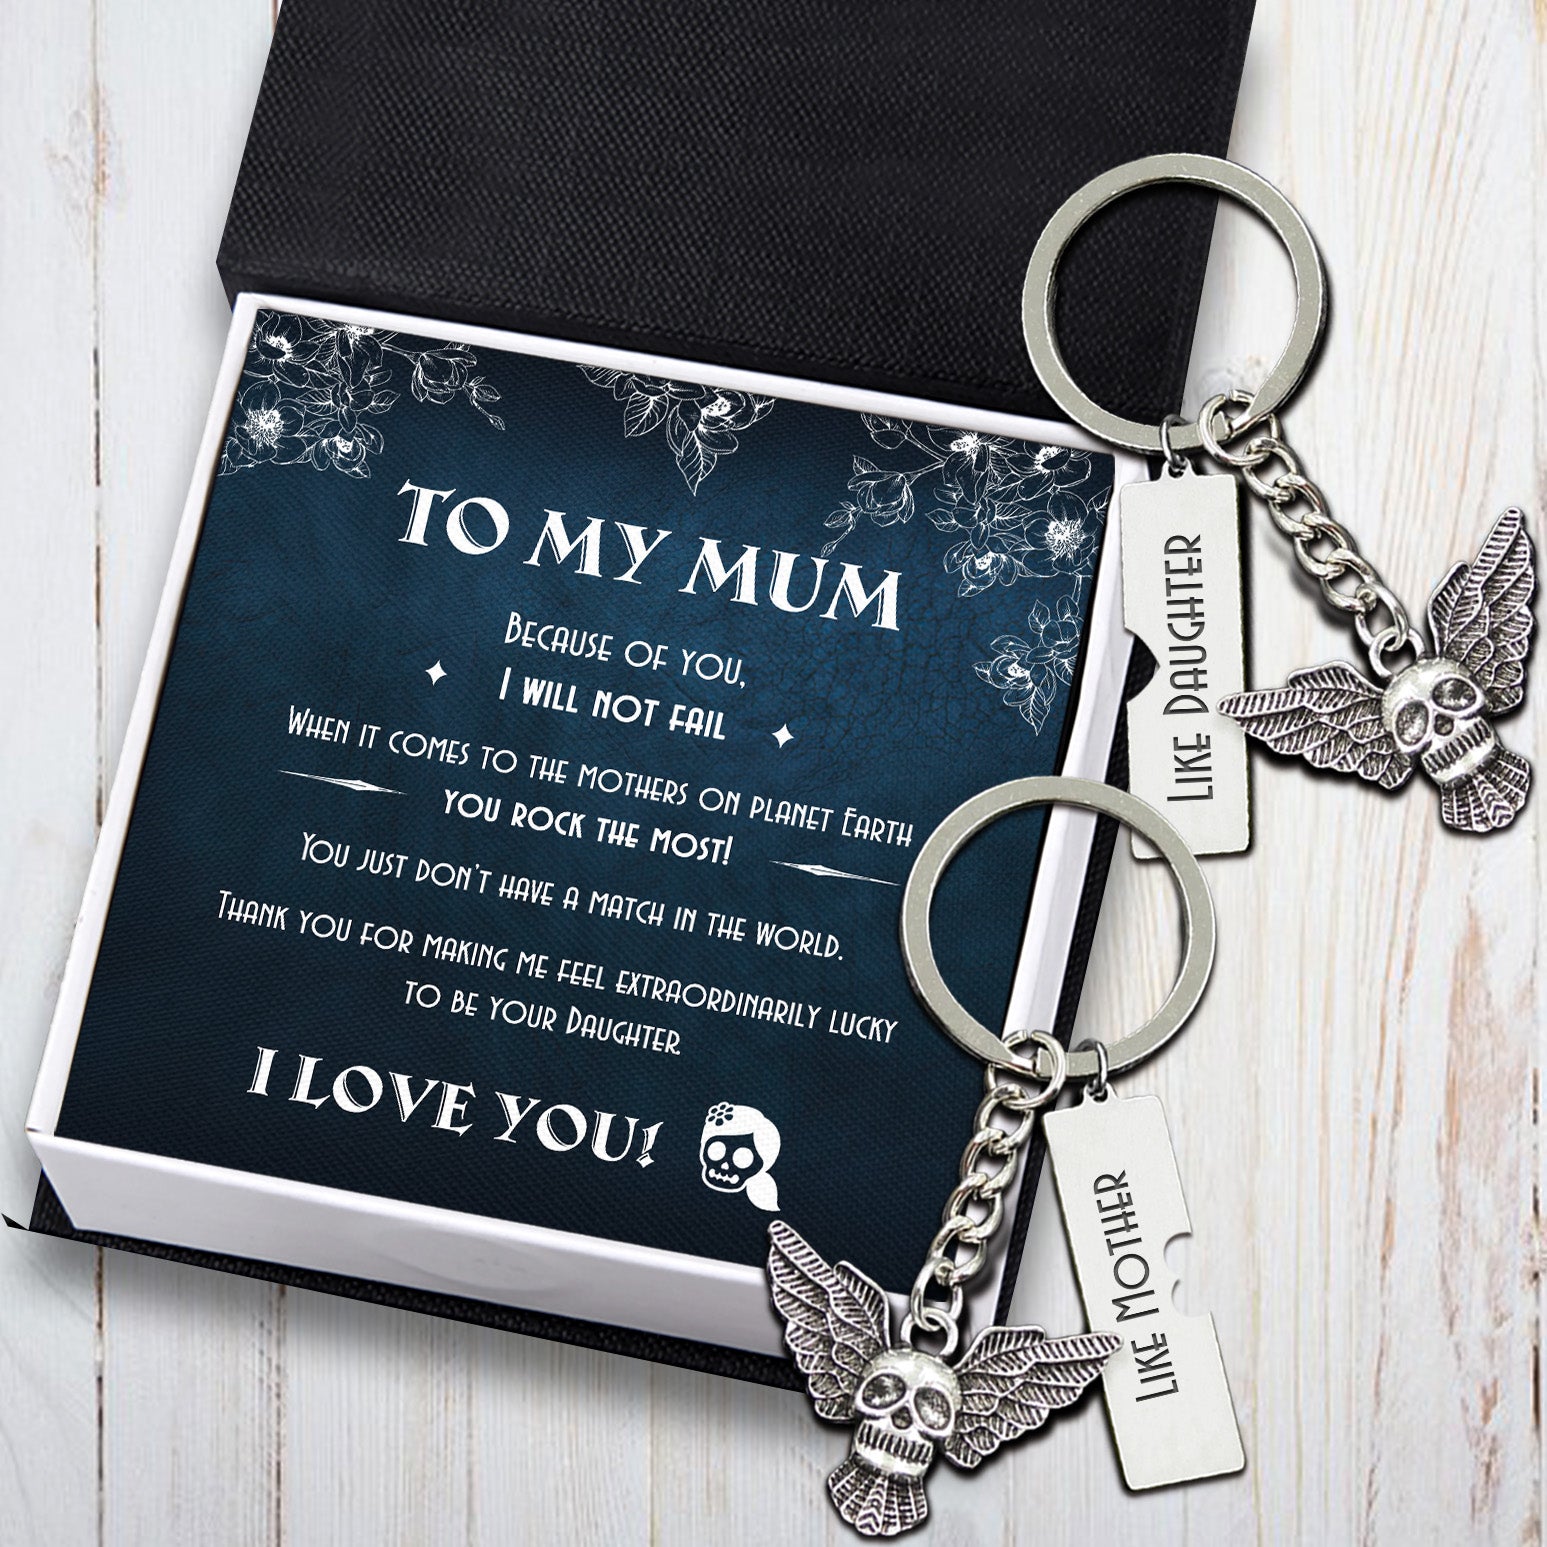 Couple Fly Skull Keychain - Skull - To My Mum - Because Of You, I Will Not Fail - Ukgkeu19001